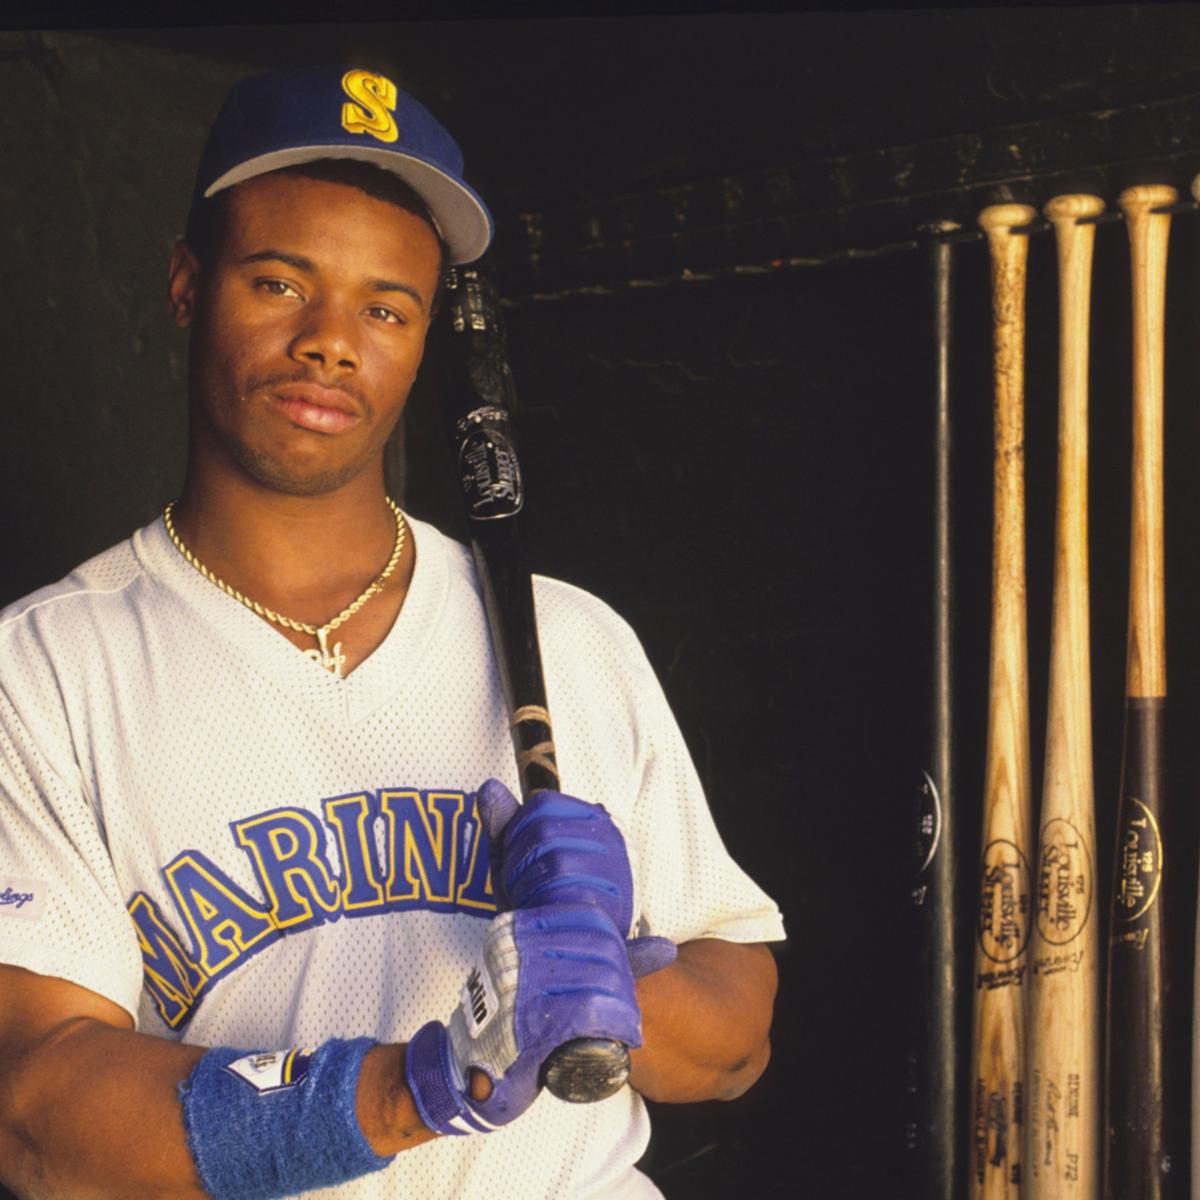 The Top 10 Ken Griffey Jr. Stats. The Best Numbers from a Hall of